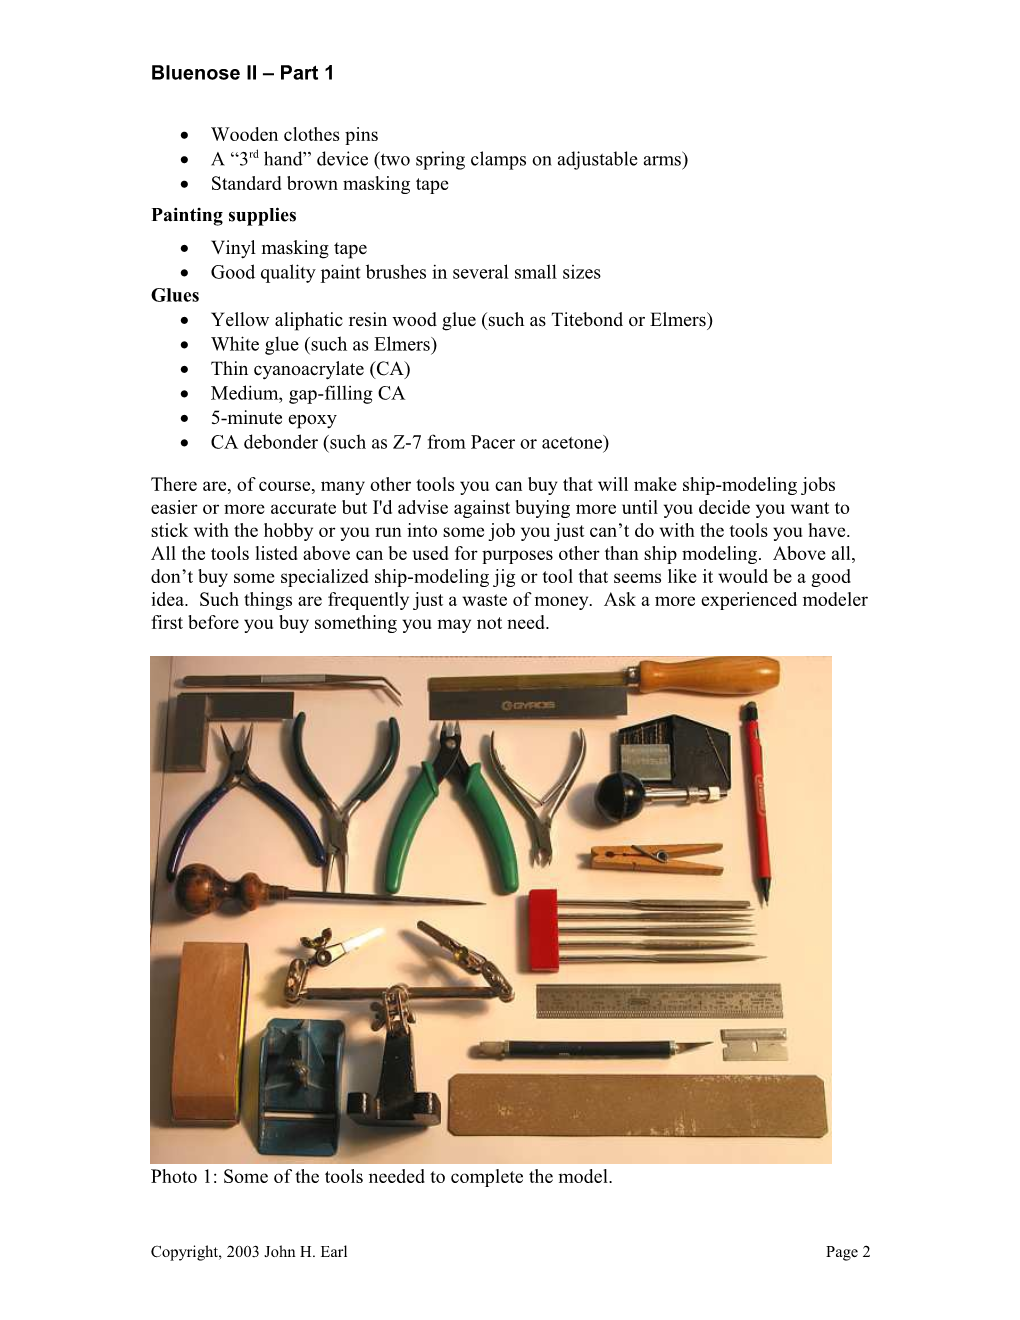 You Will, of Course, Need Several Tools to Complete Your Model of Bluenose II